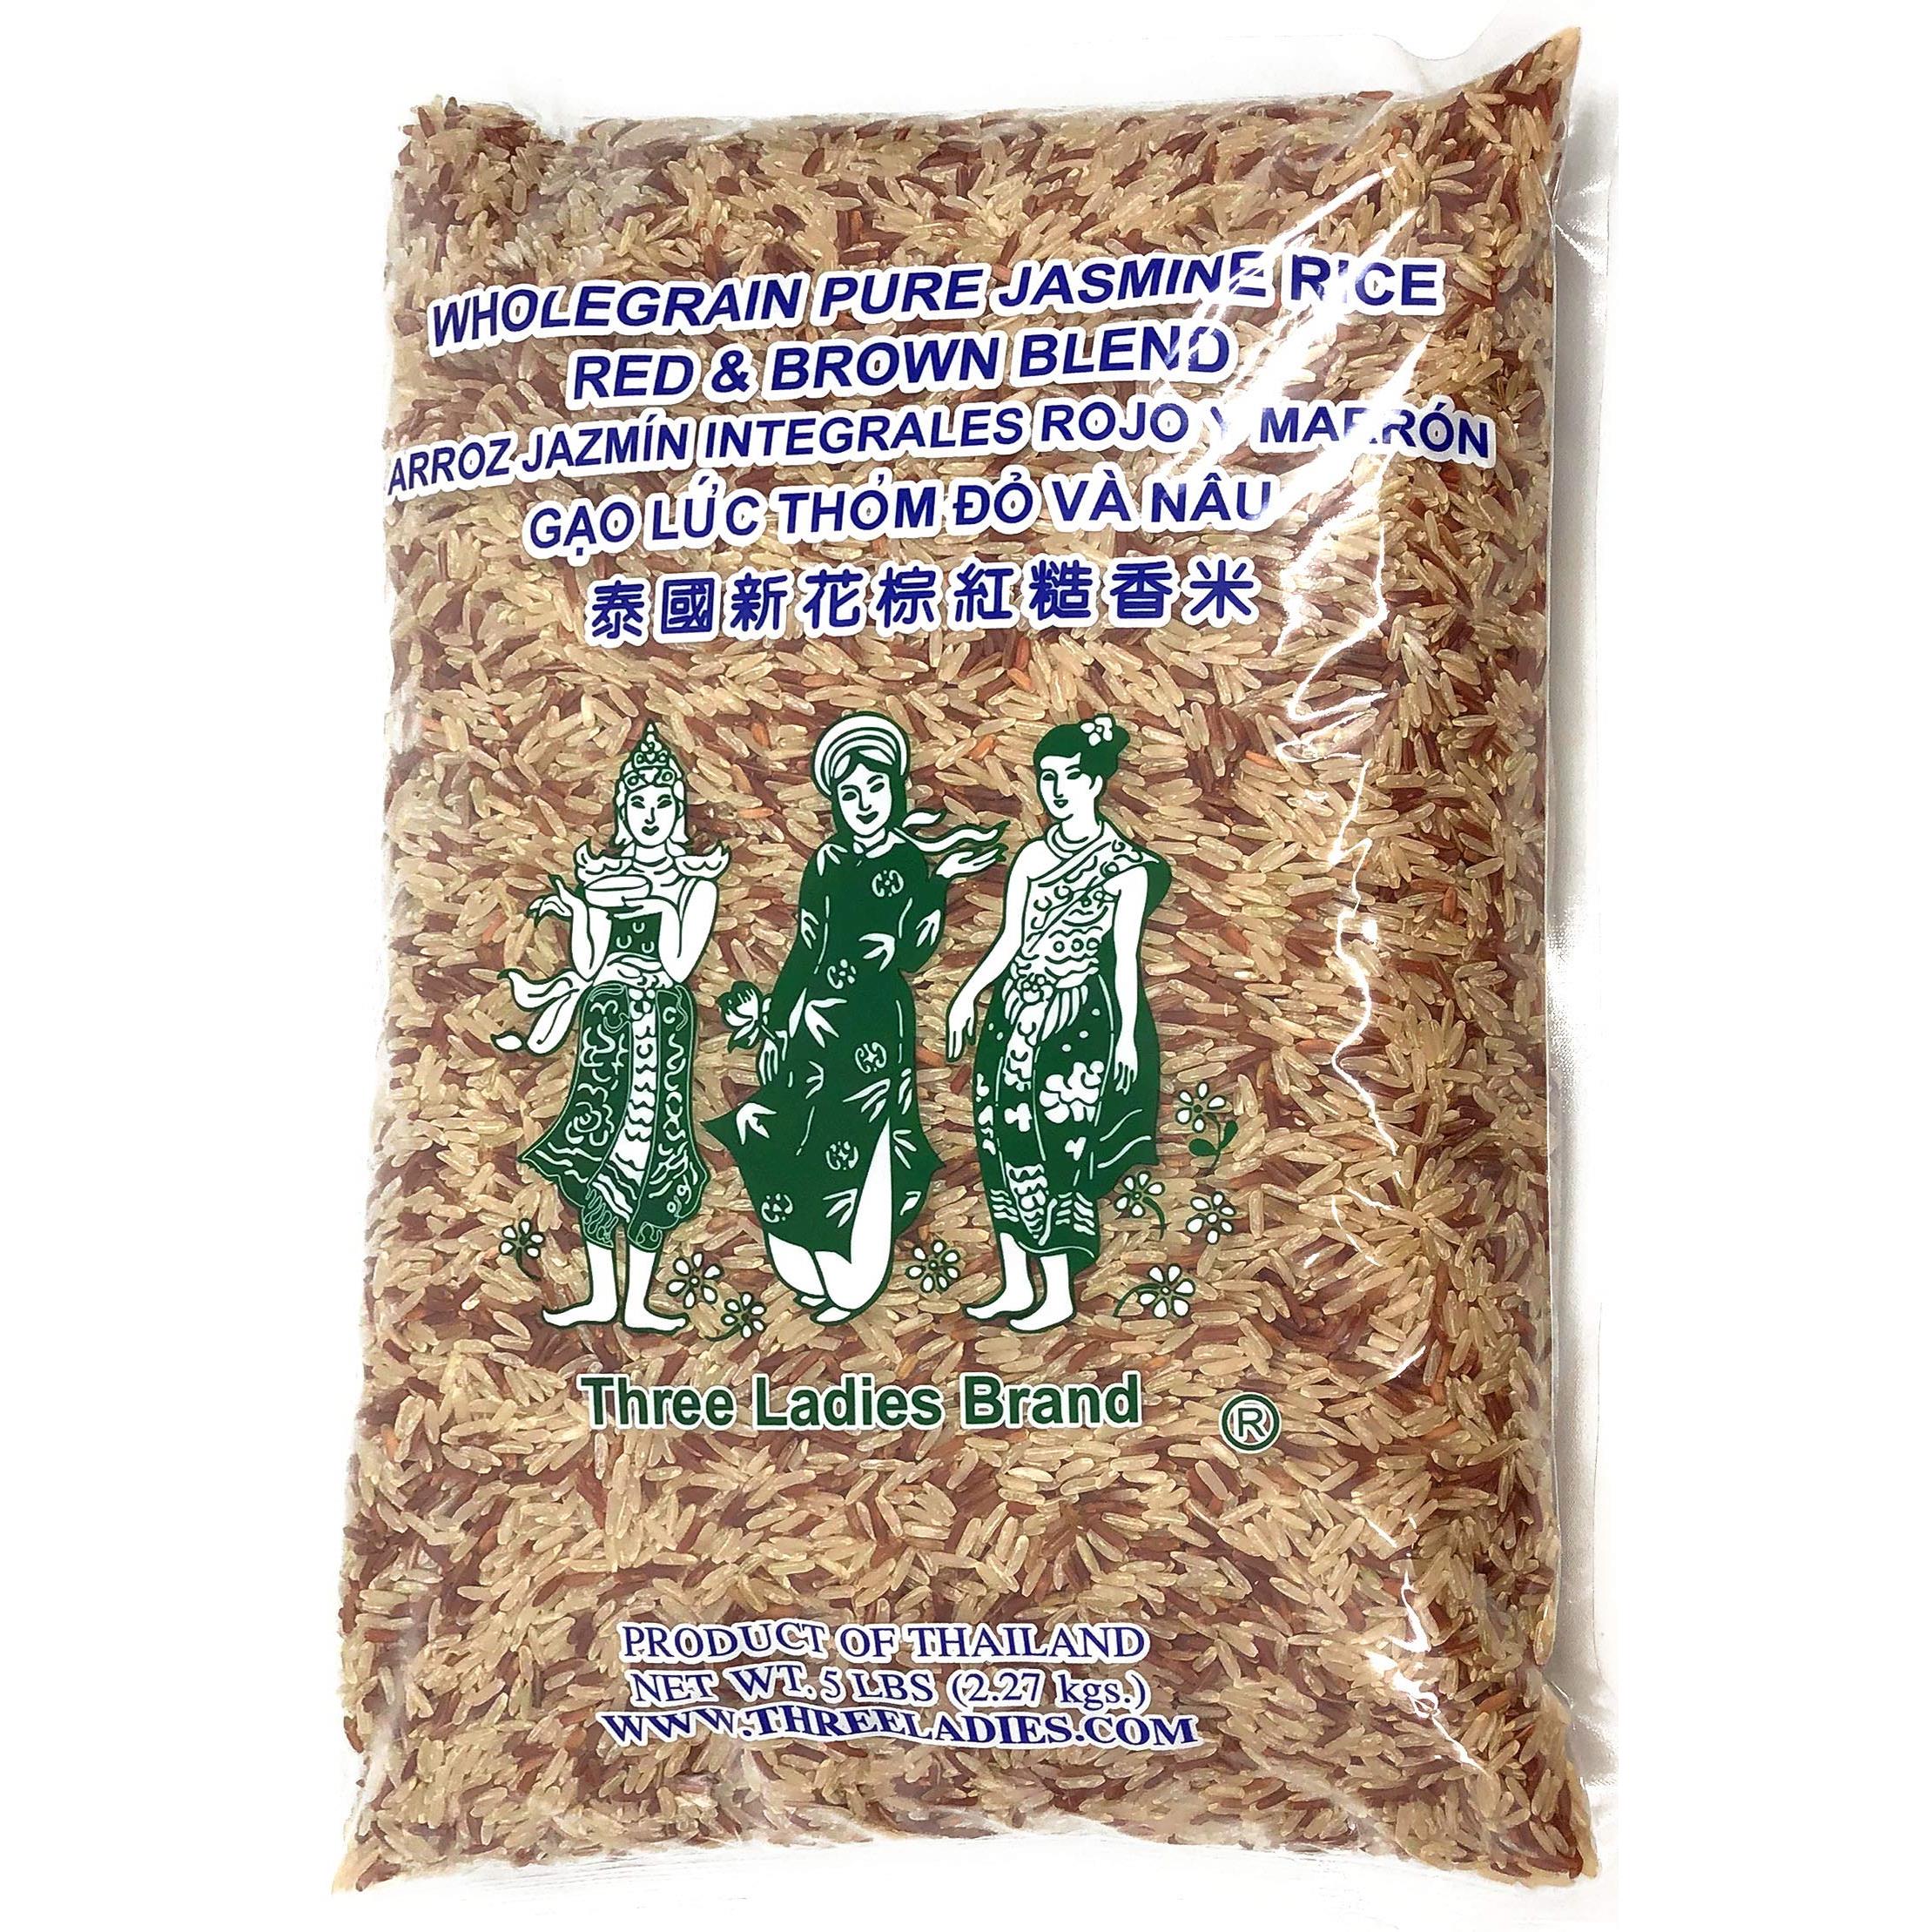 5 Pounds Three Ladies Brand Whole Grain Pure Jasmine Rice Red & Brown Blend (One Bag)